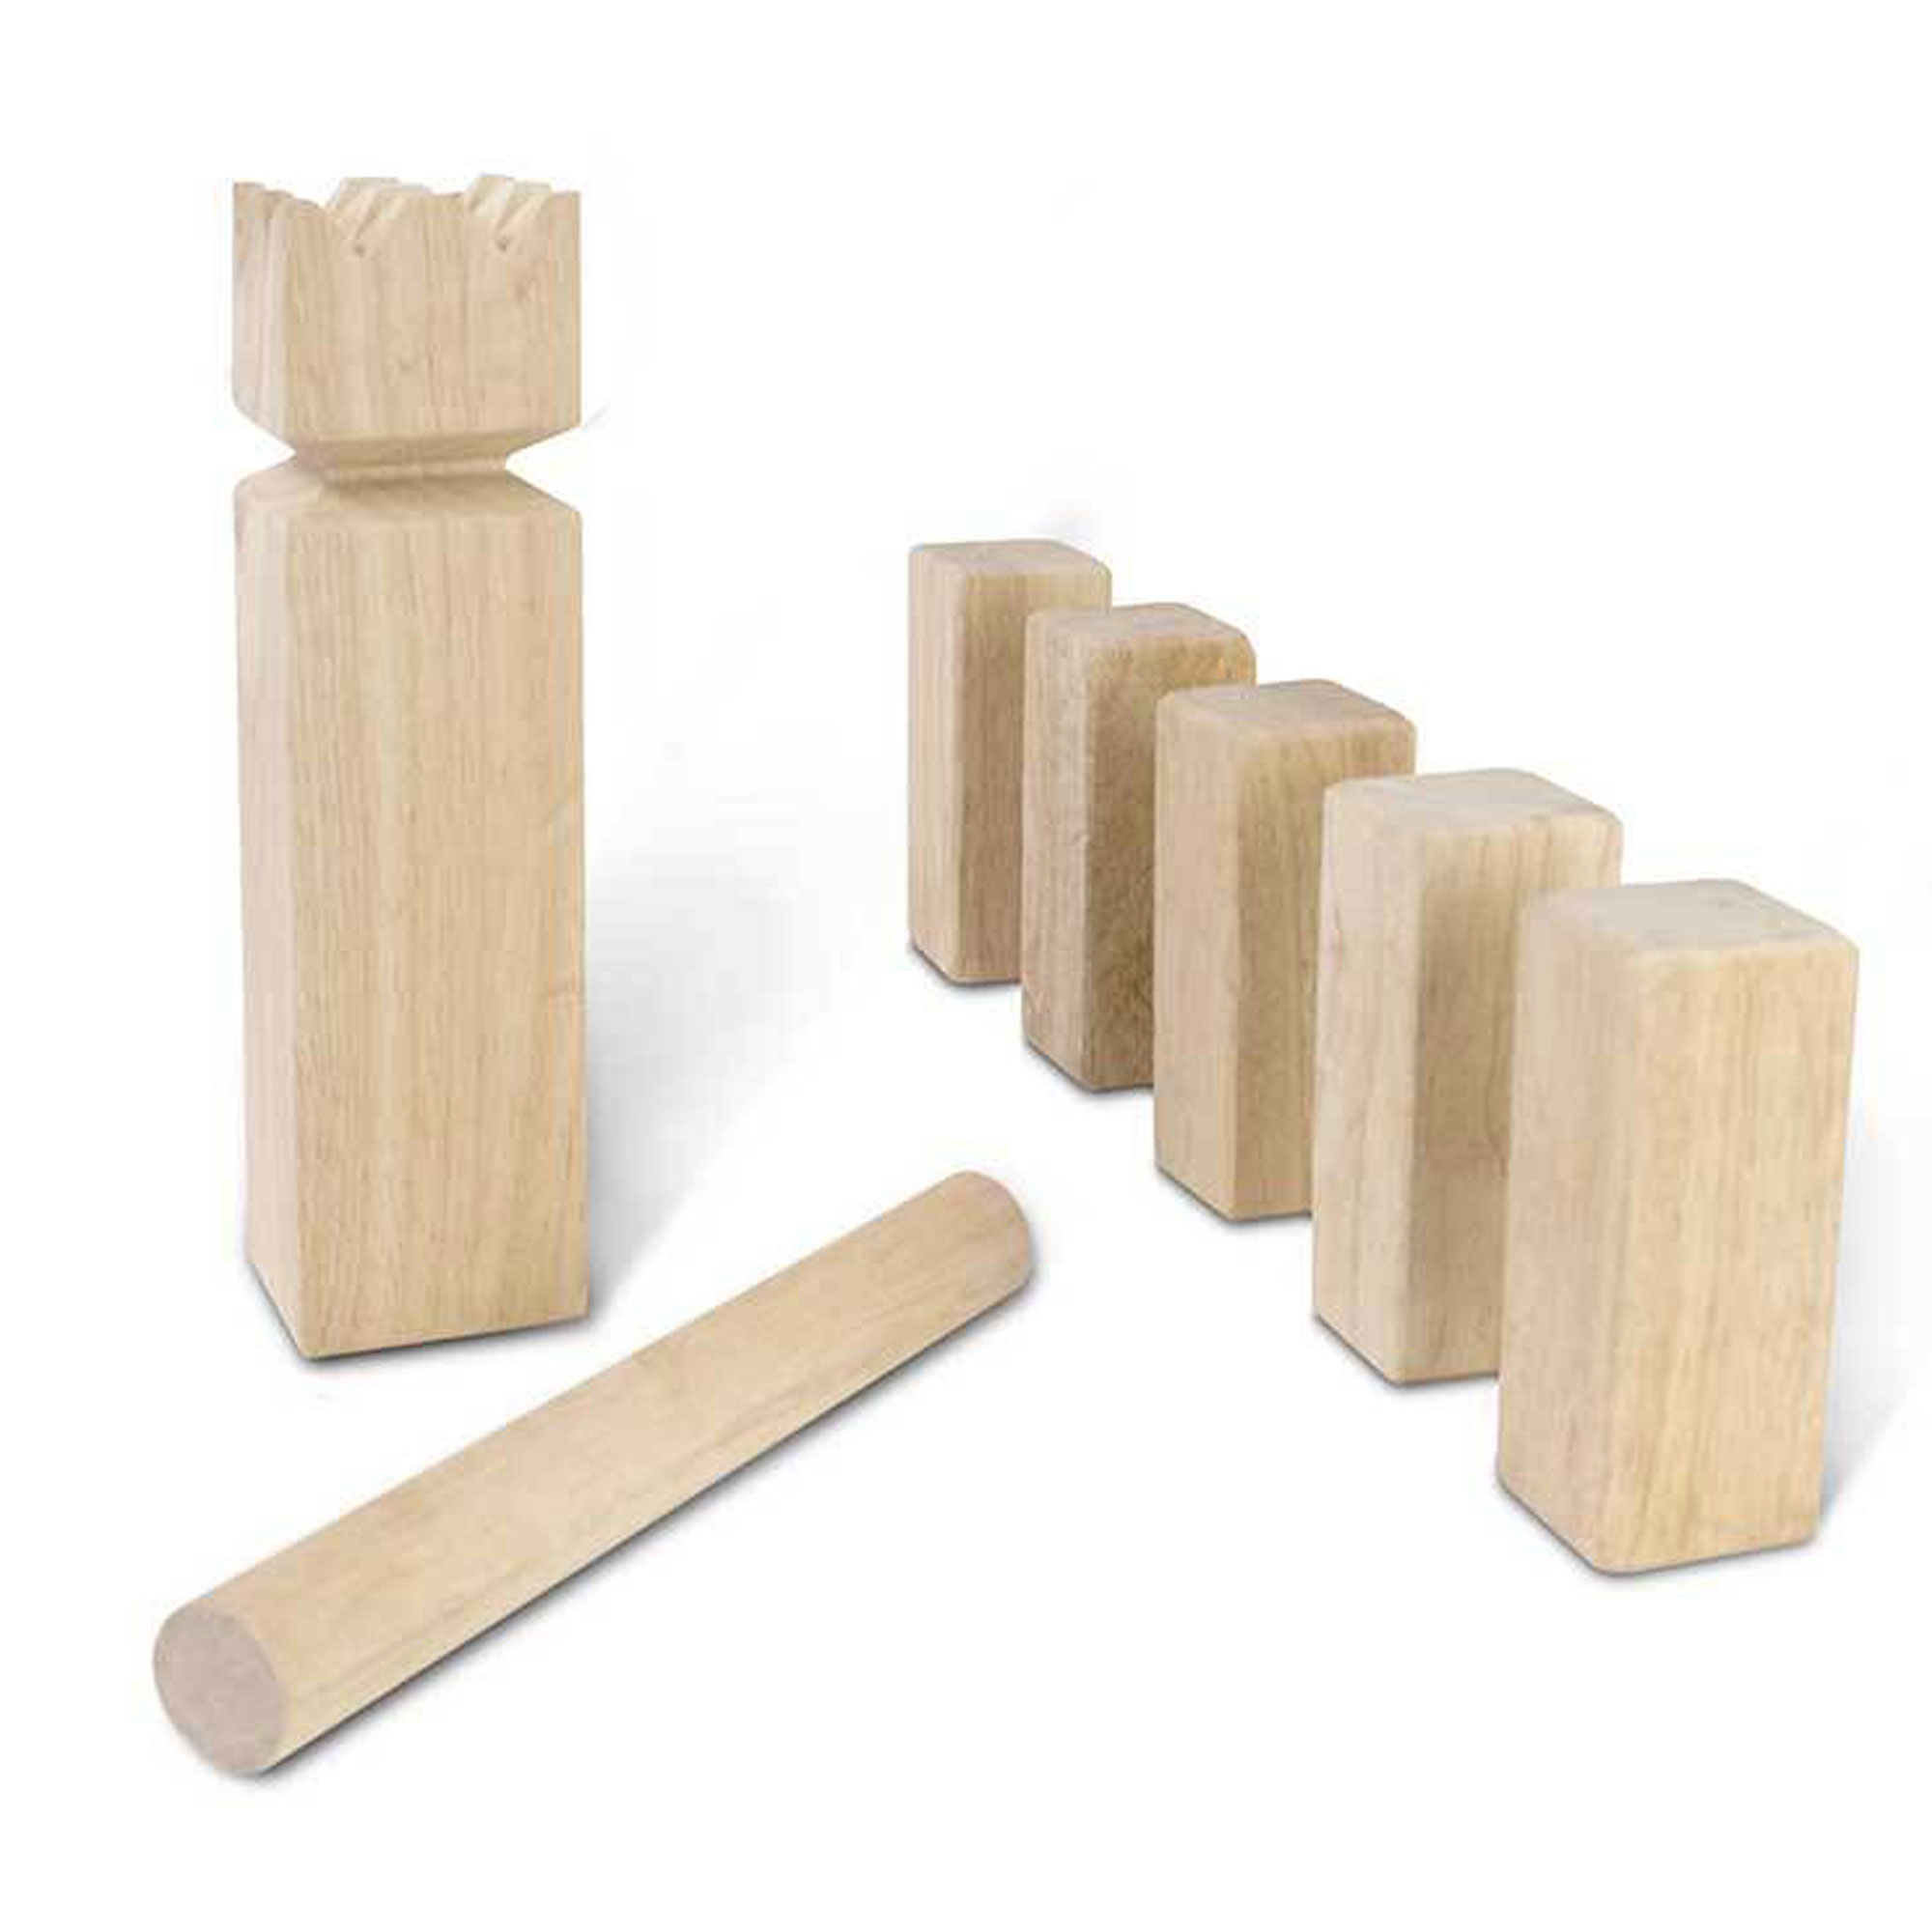 YardGames Kubb Premium Wooden Outdoor Backyard Game Set with Carrying Bag - image 2 of 11